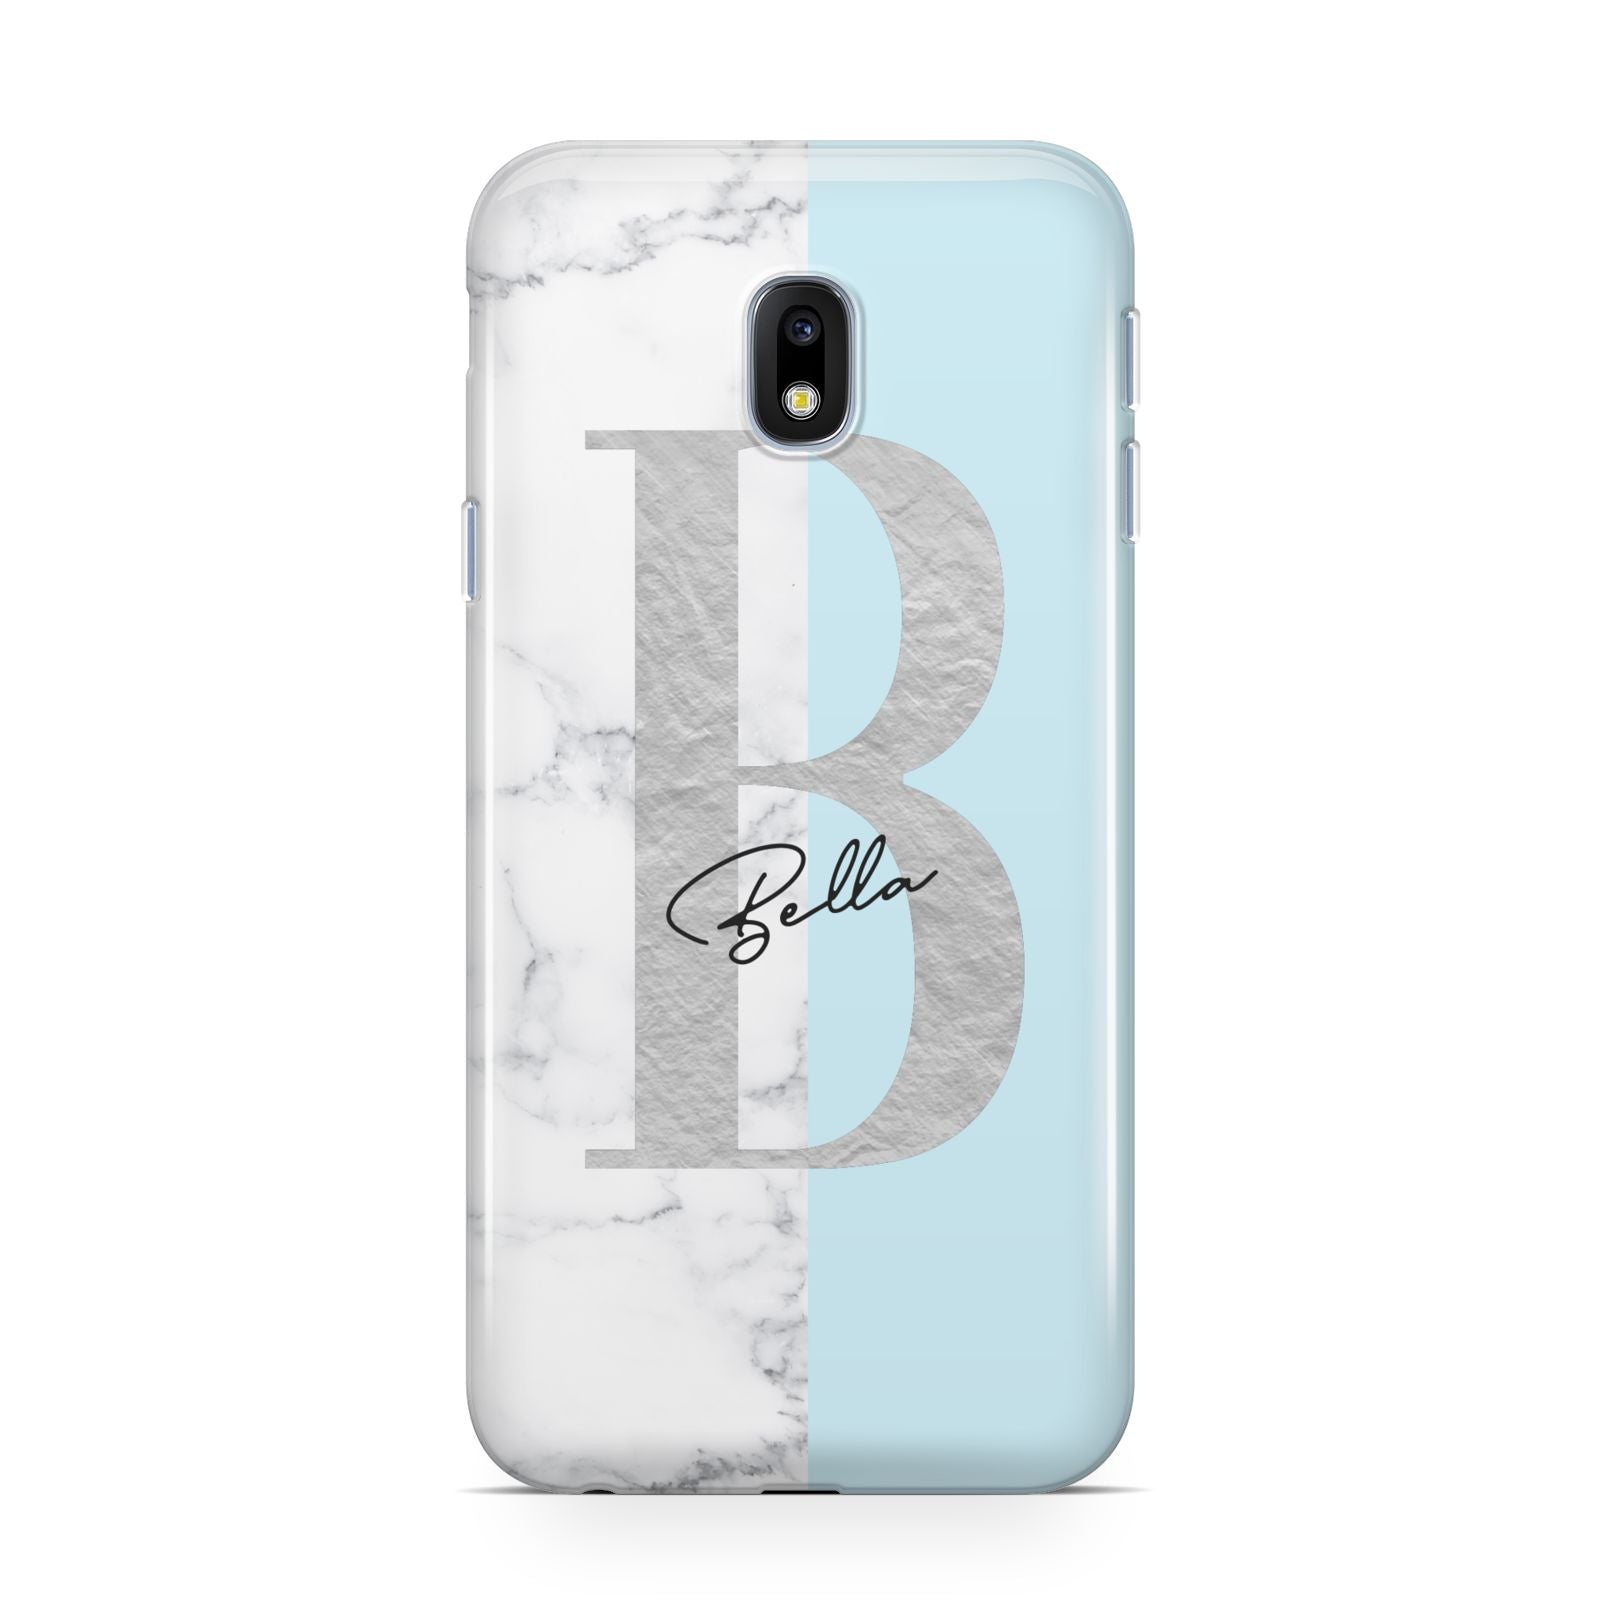 Personalised Chrome Marble Samsung Galaxy J3 2017 Case